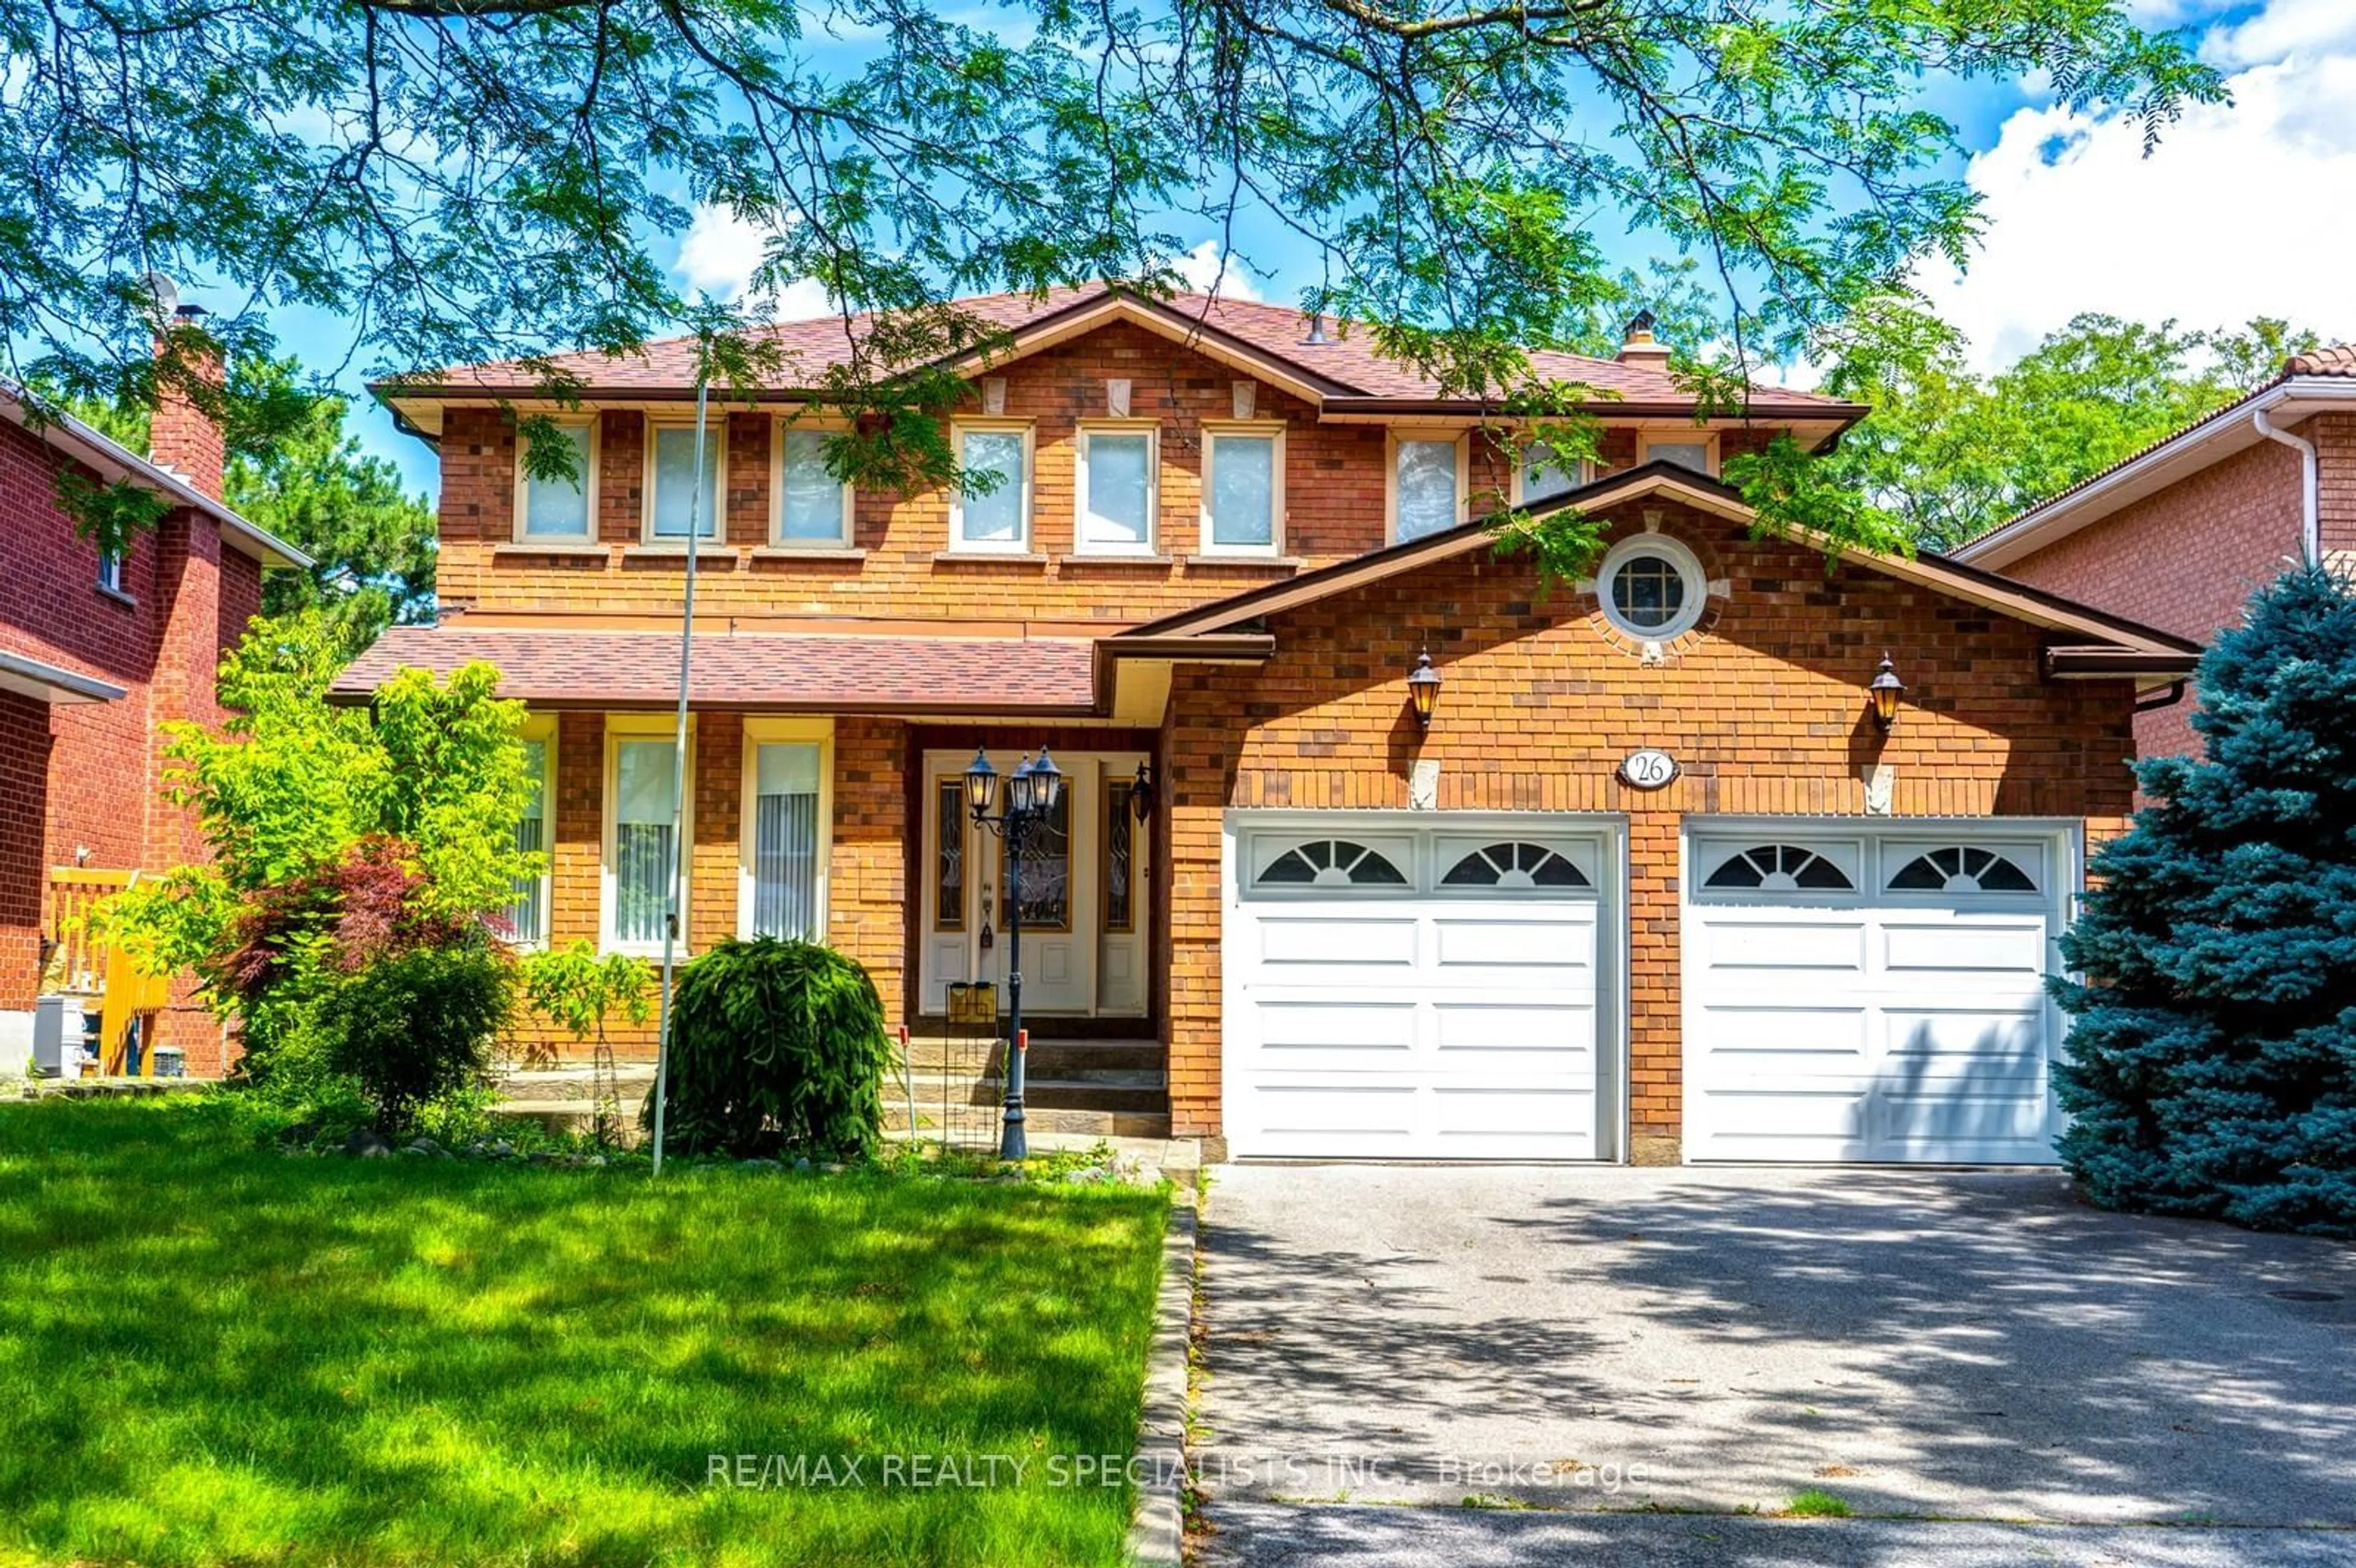 Home with brick exterior material for 26 Eton St, Markham Ontario L3R 8Z1